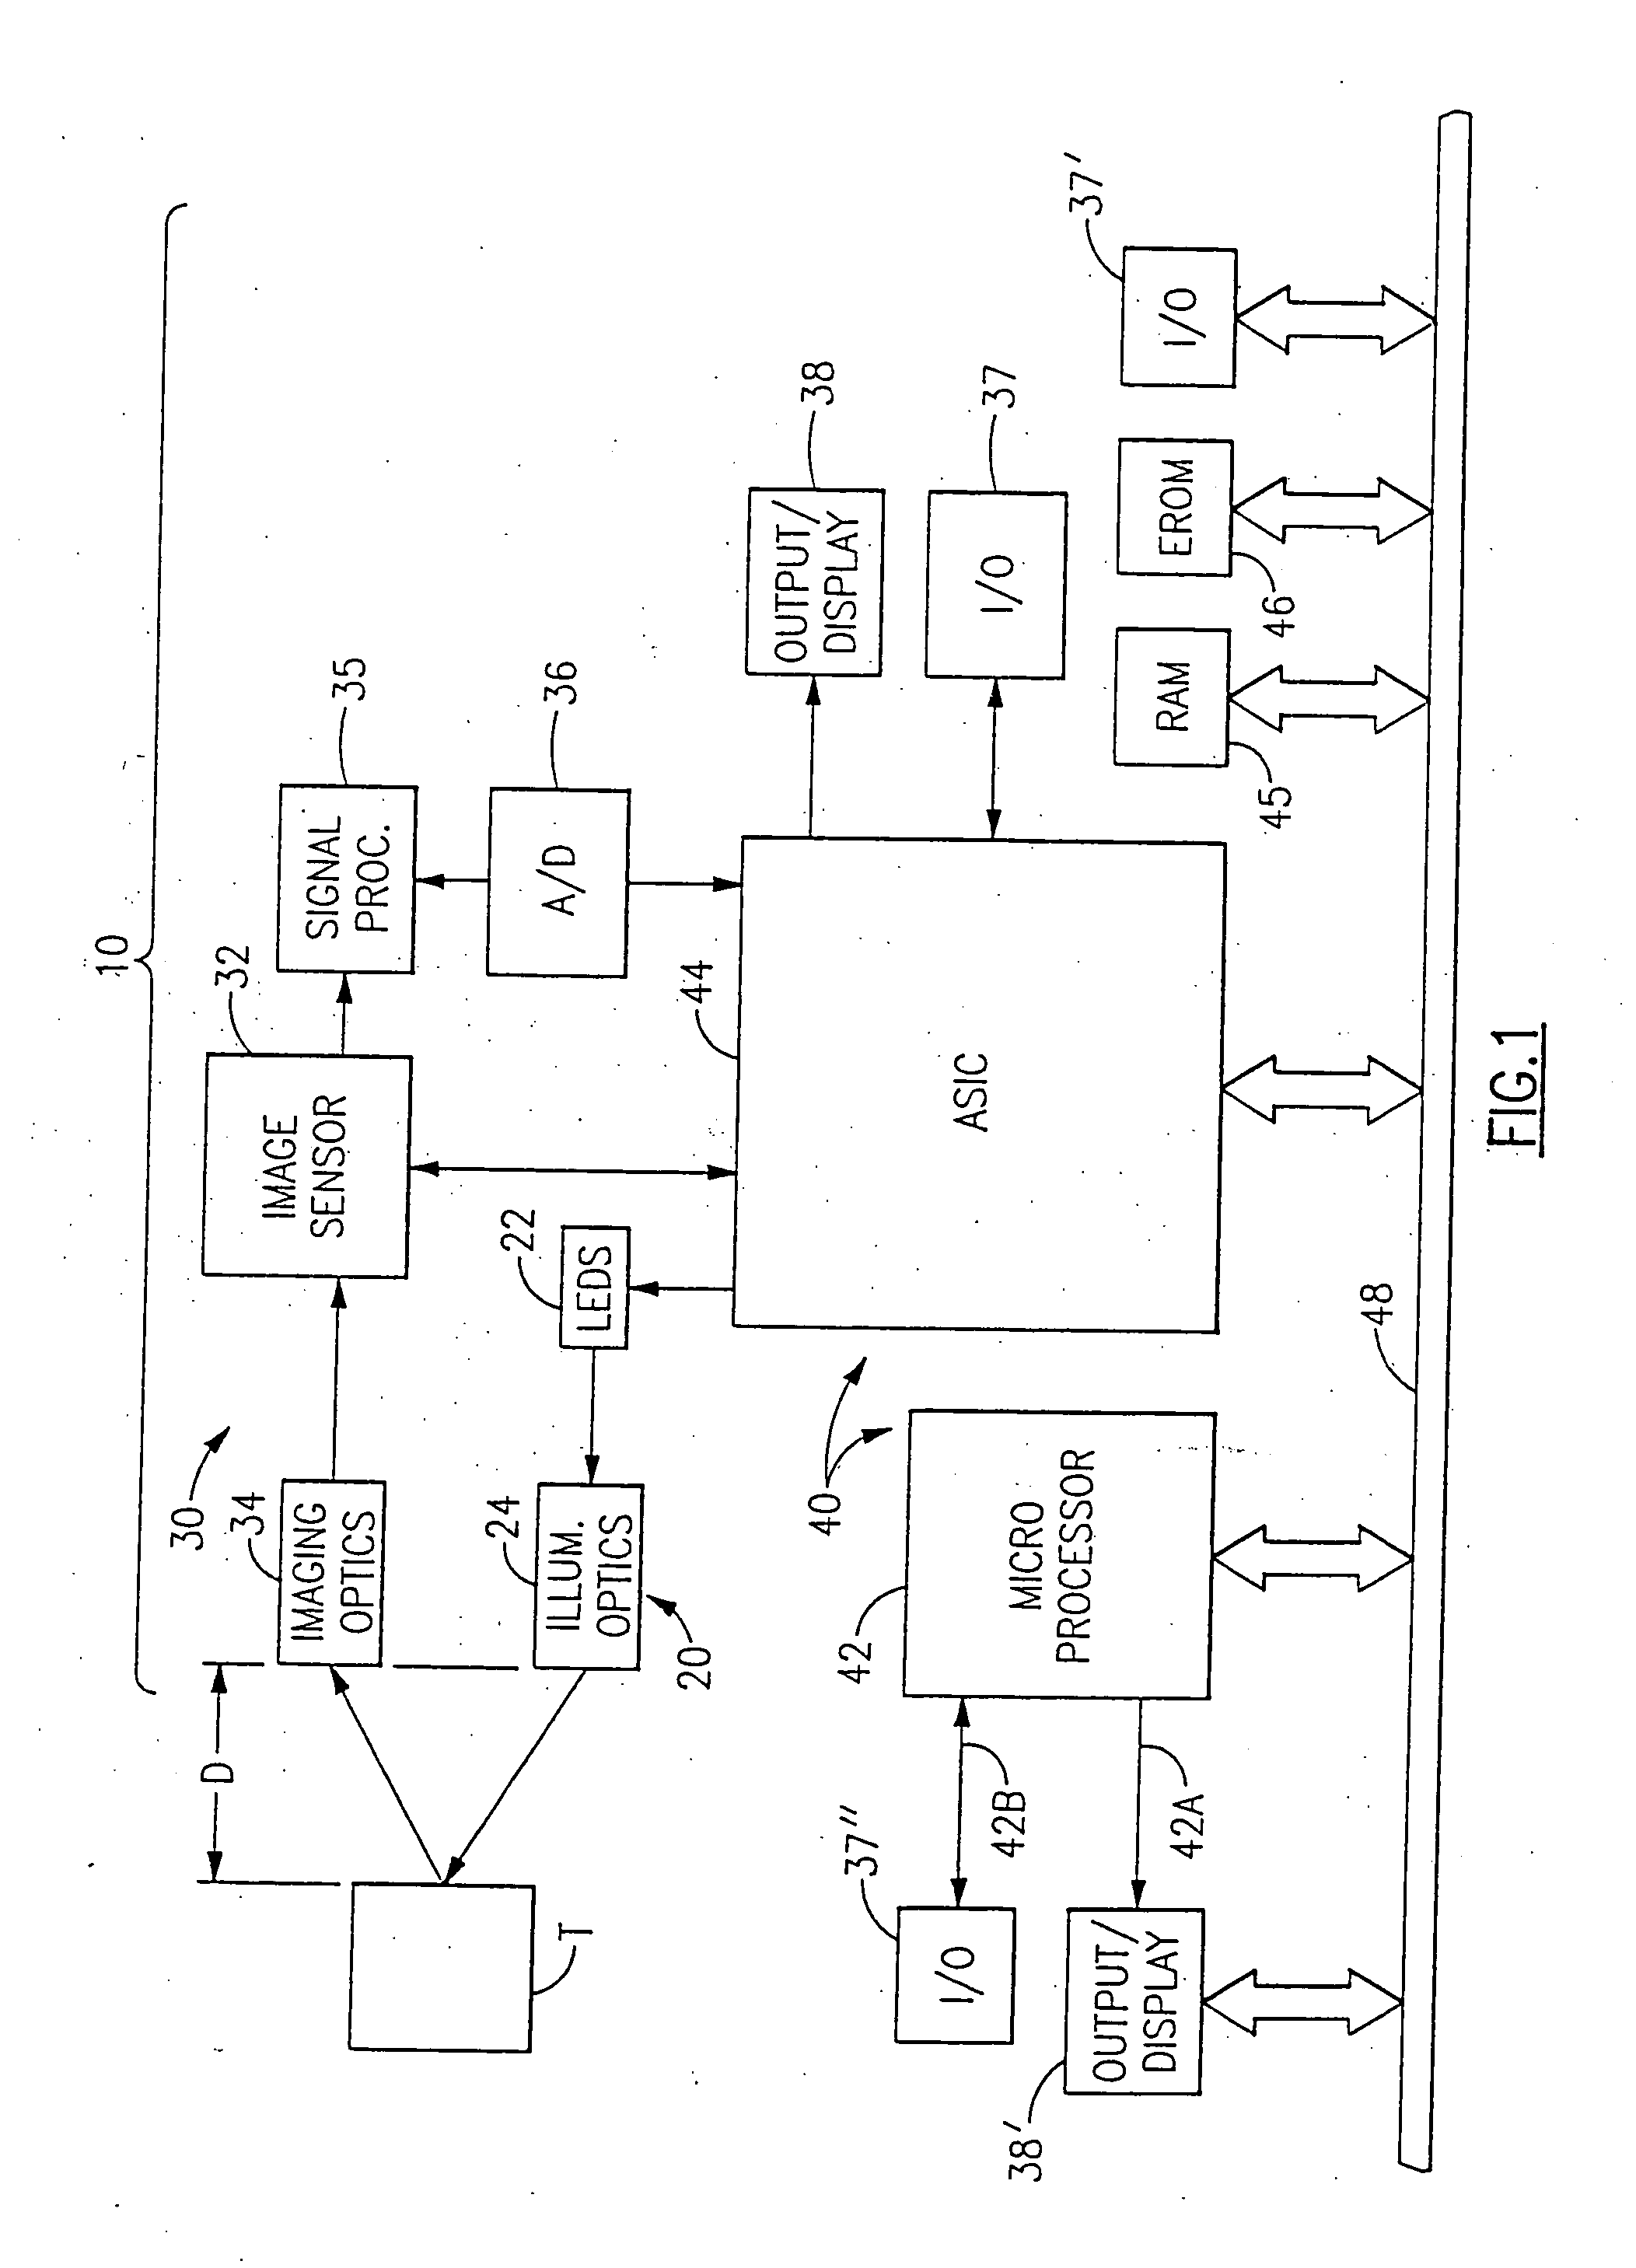 Optical reader having two-dimensional solid state image sensor and light generator